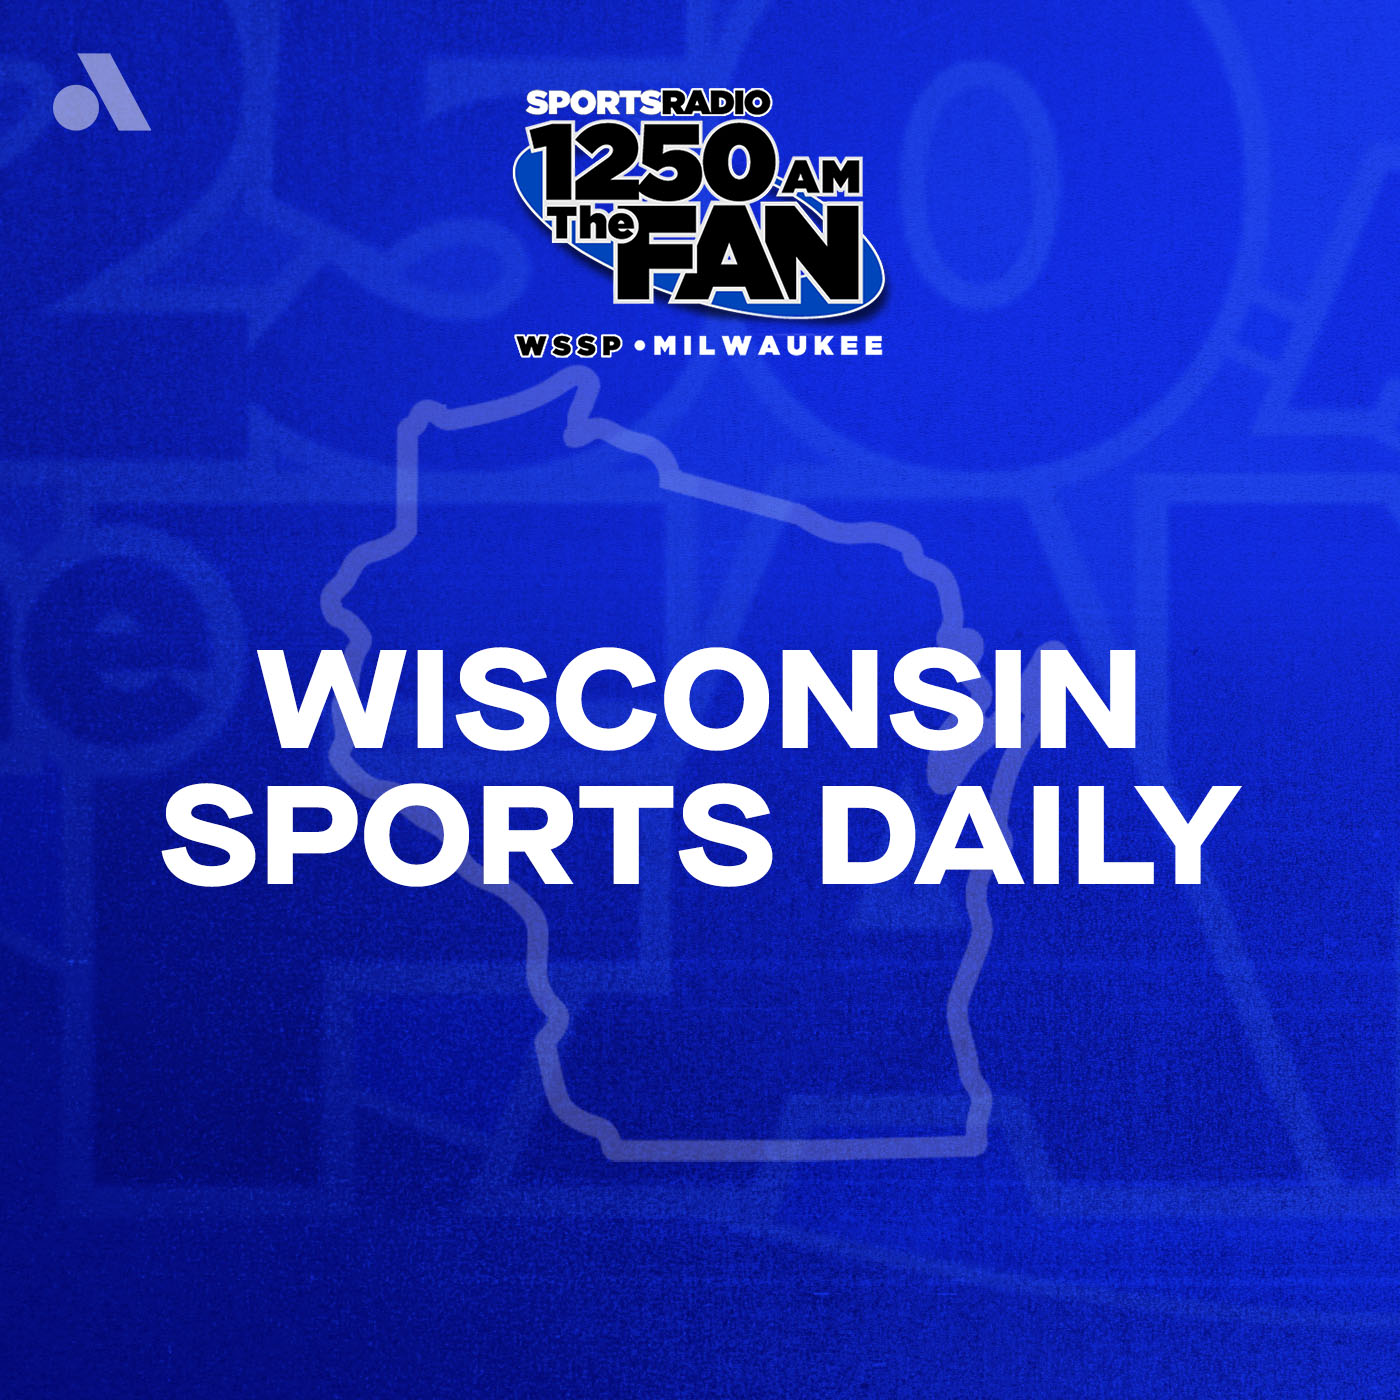 Tuesday, April 23rd: Tim Dillard of Bally Sports WI joins Wisconsin Sports Daily